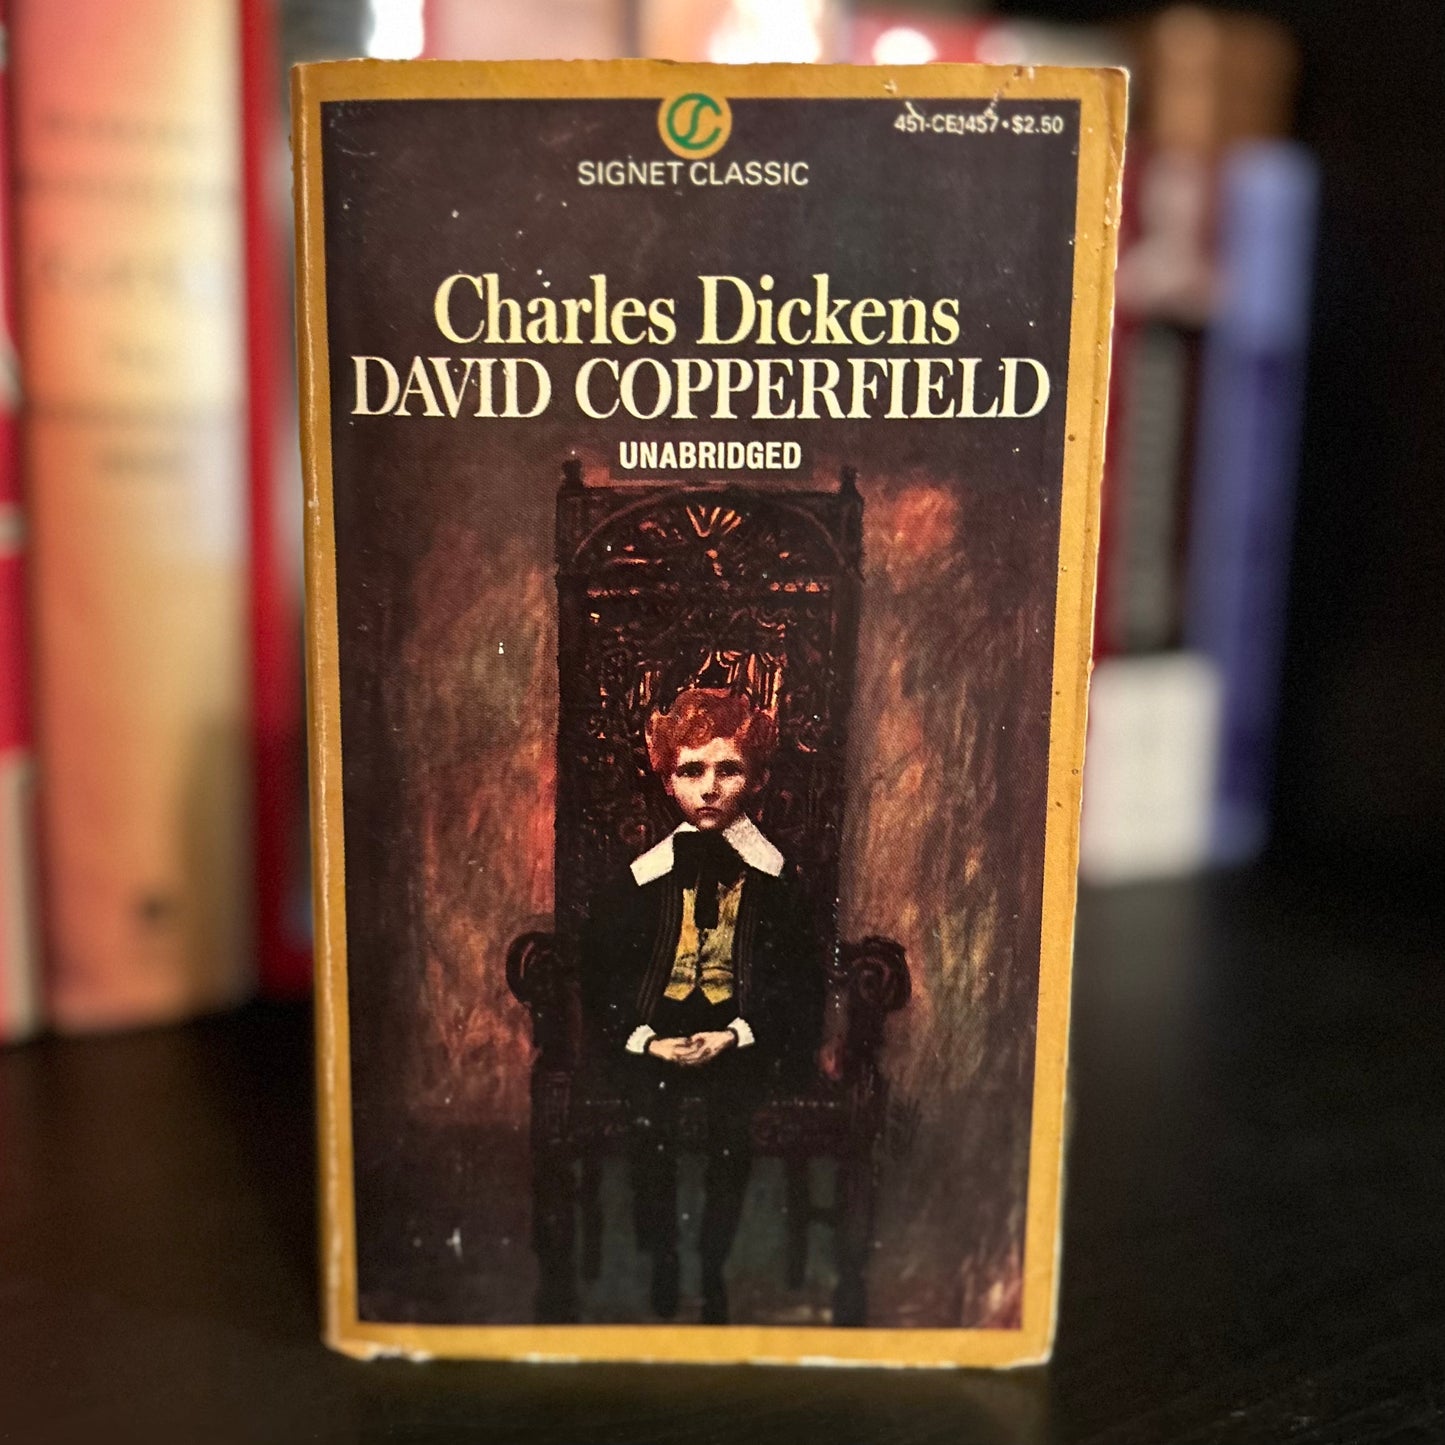 David Copperfield -Charles Dickens